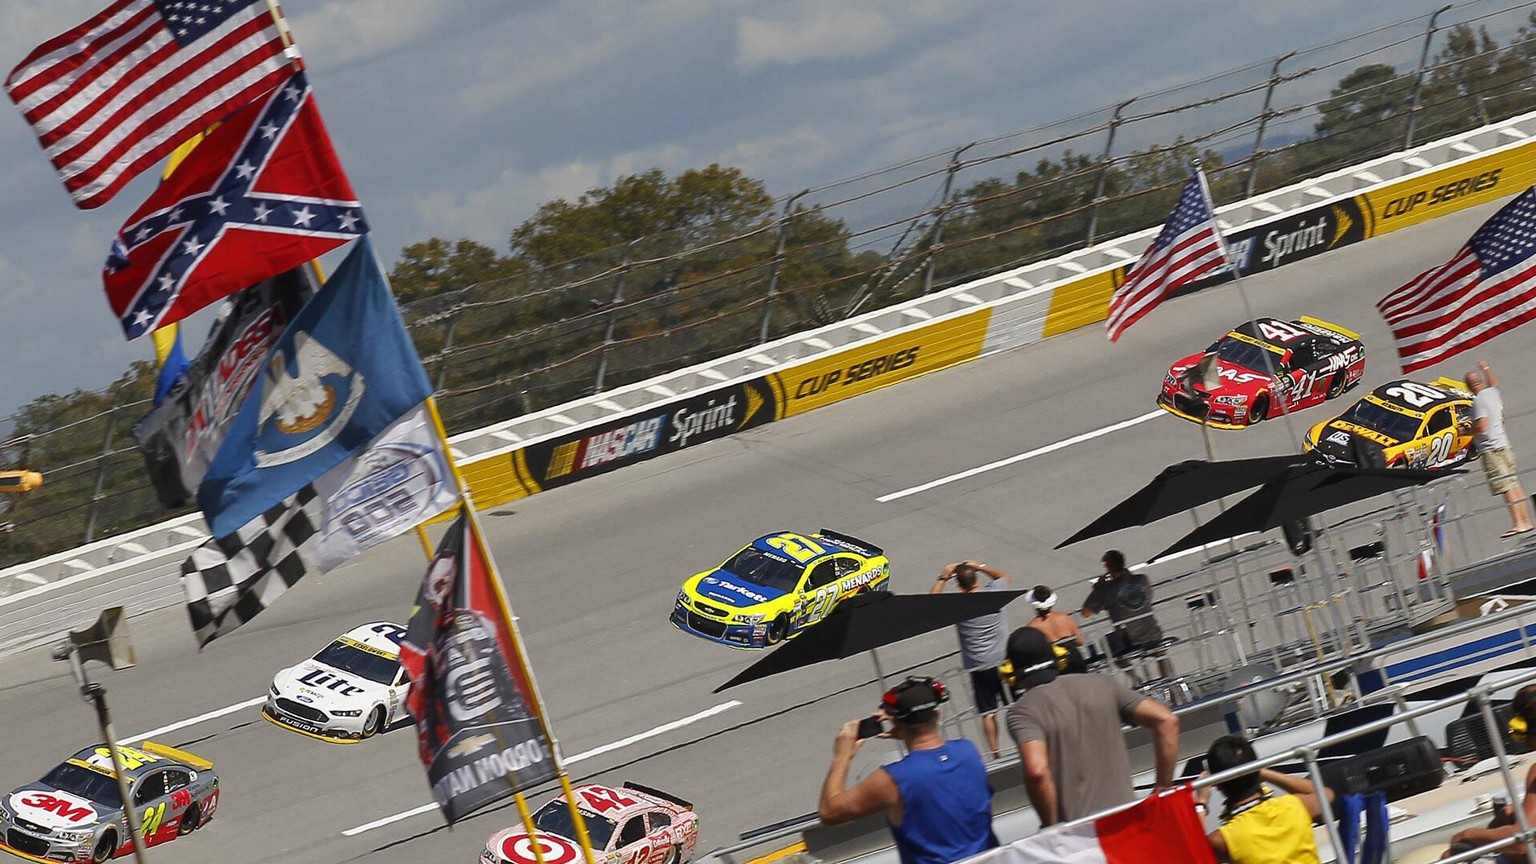 June 10, 2020: FILE: NASCAR, Motorsport, USA on Wednesday said it is banning the display of the Confederate flag at all events and properties of the auto racing giant. PICTURED: Oct. 23, 2015, Tallade ...